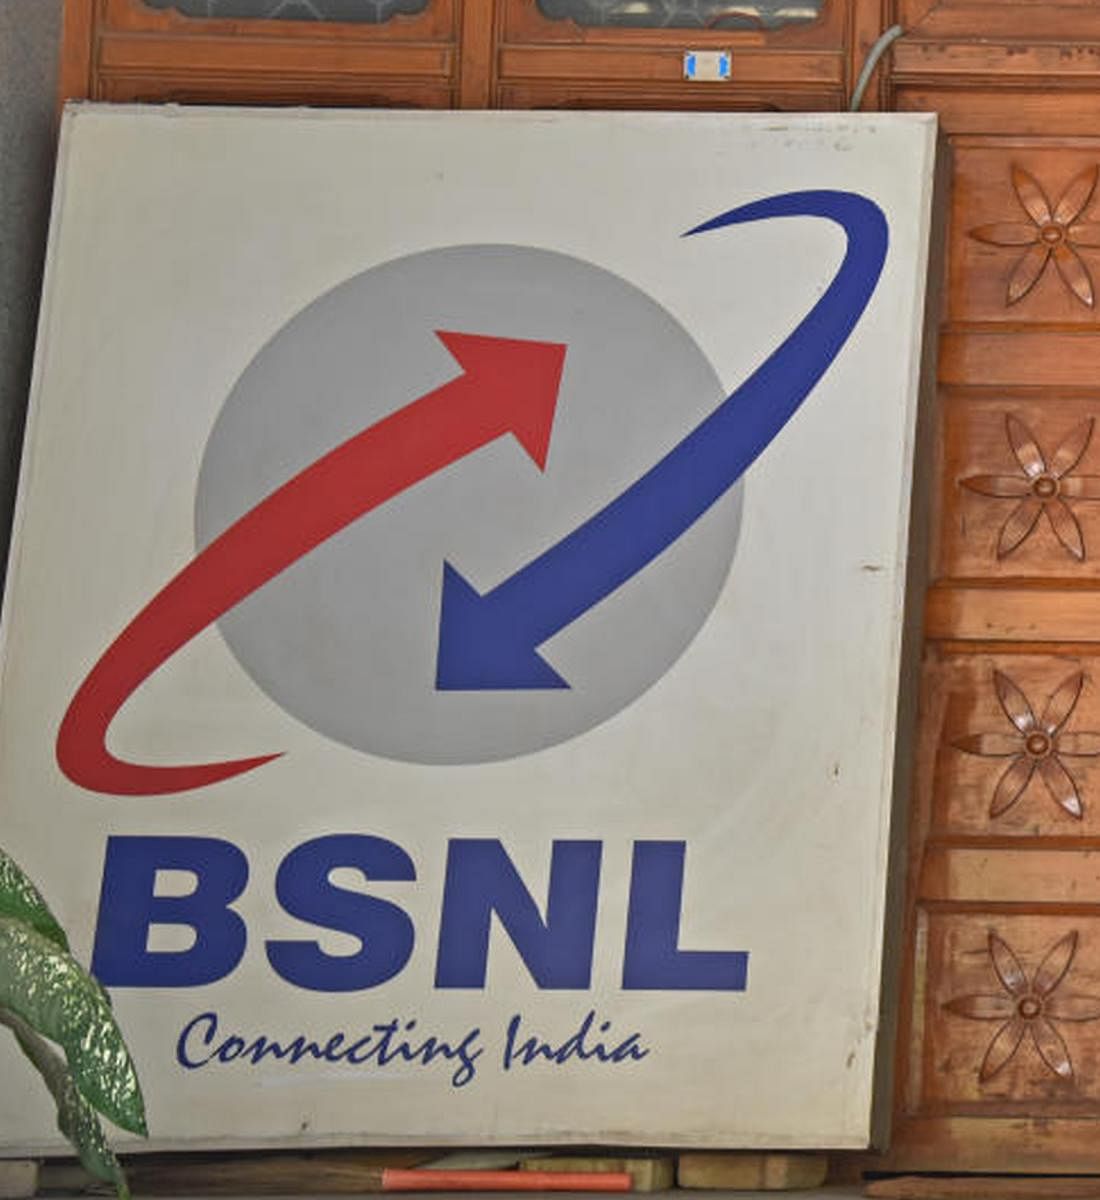 BSNL gets Rs 770 cr from BBNL to clear vendor dues